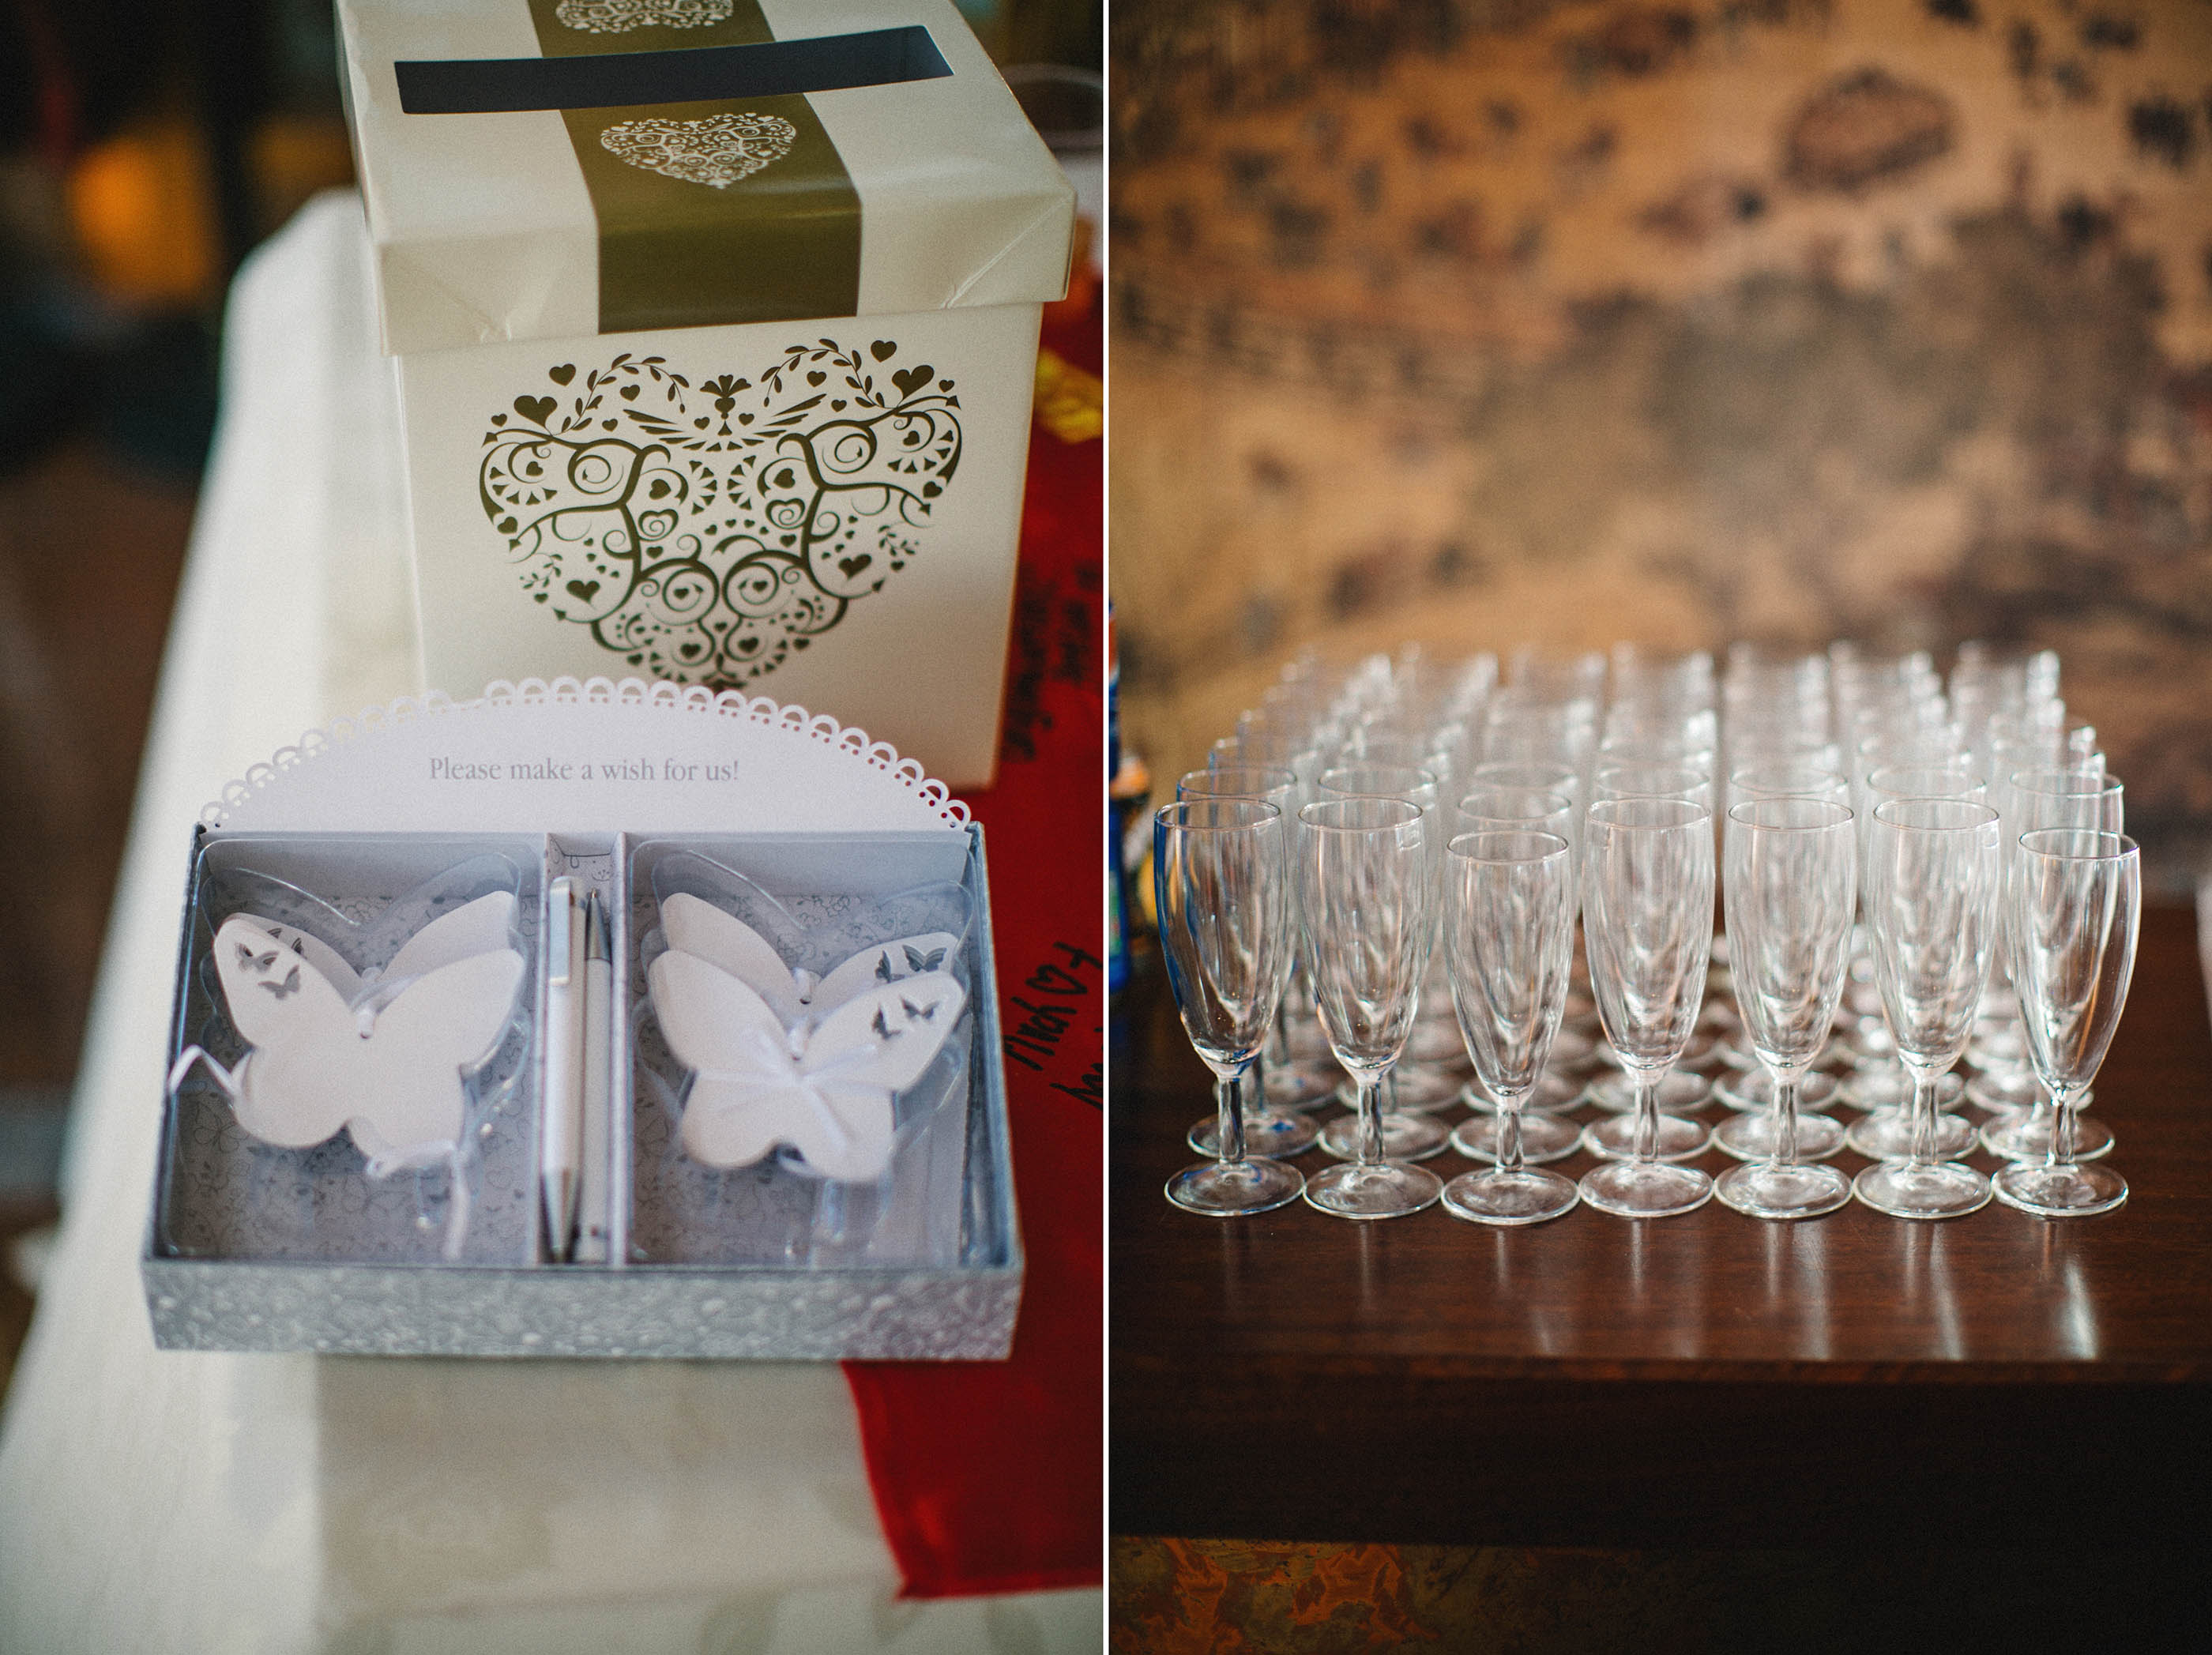 nicholas-lau-photo-photography-fine-art-film-wedding-london-asian-chinese-uk-mulitcultural-ceremony-reception-glasses-name-cards-butterflies